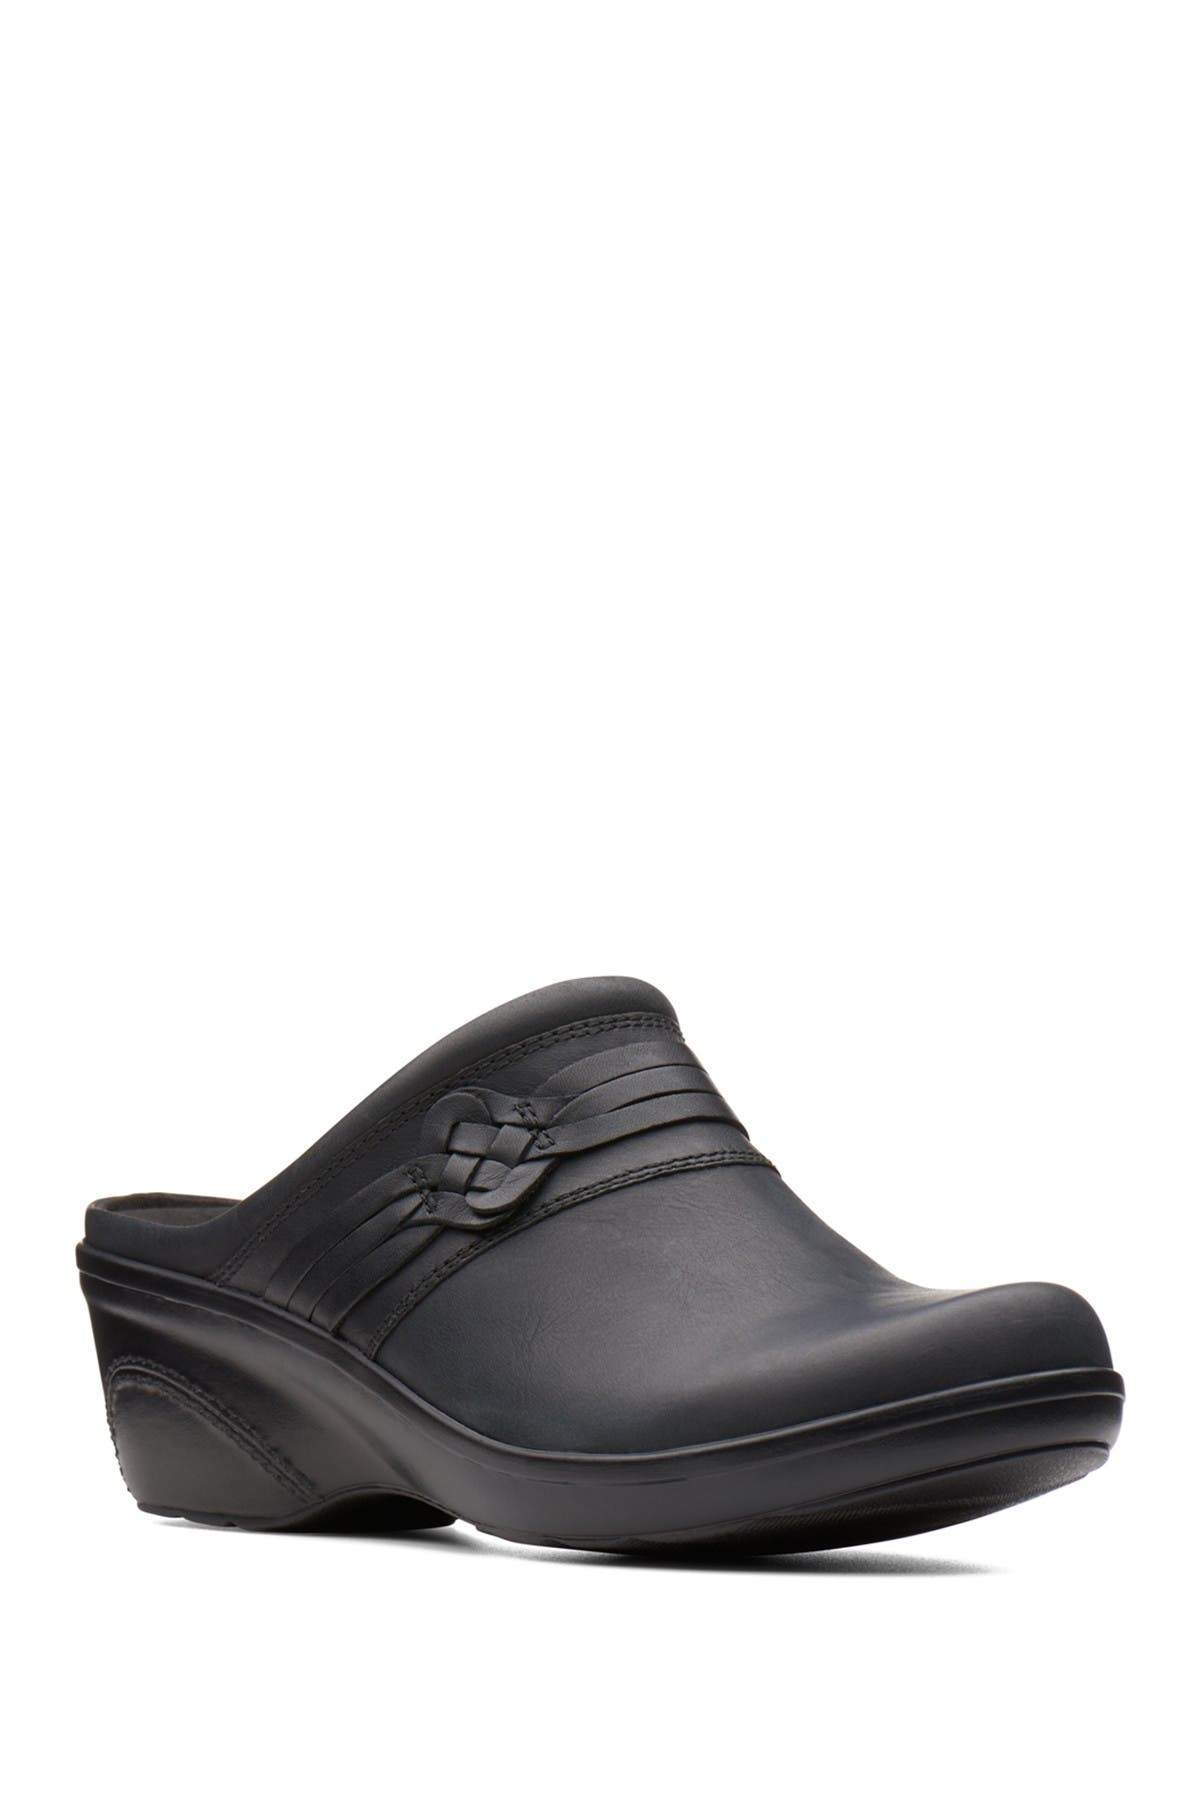 Clarks | Marion Jess Leather Clog 